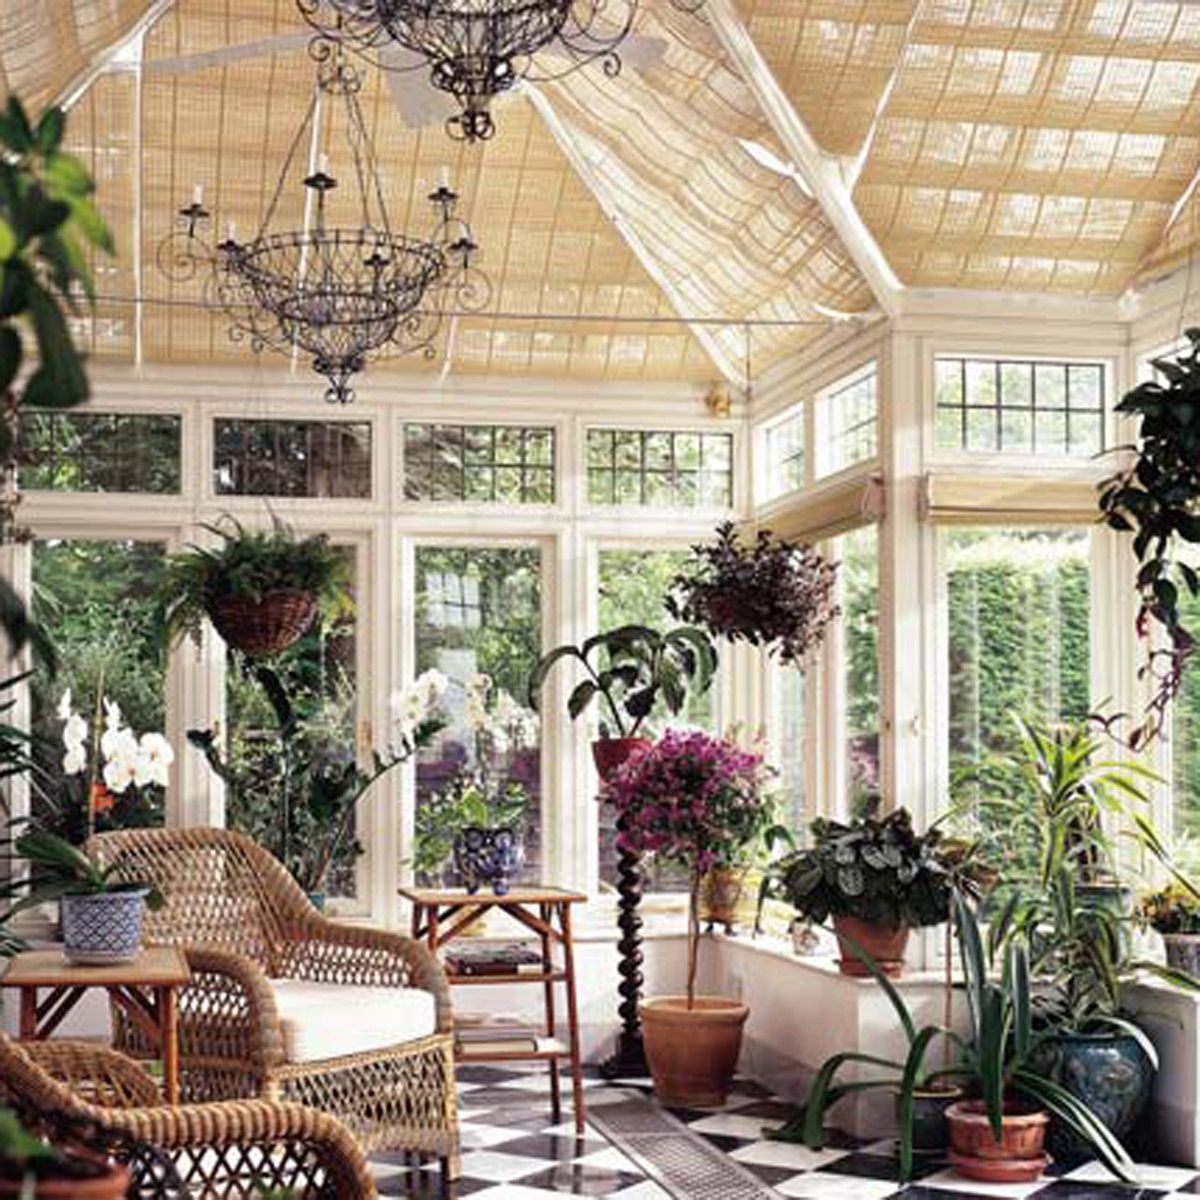 Luxury Conservatories and Orangeries | Room Outside®